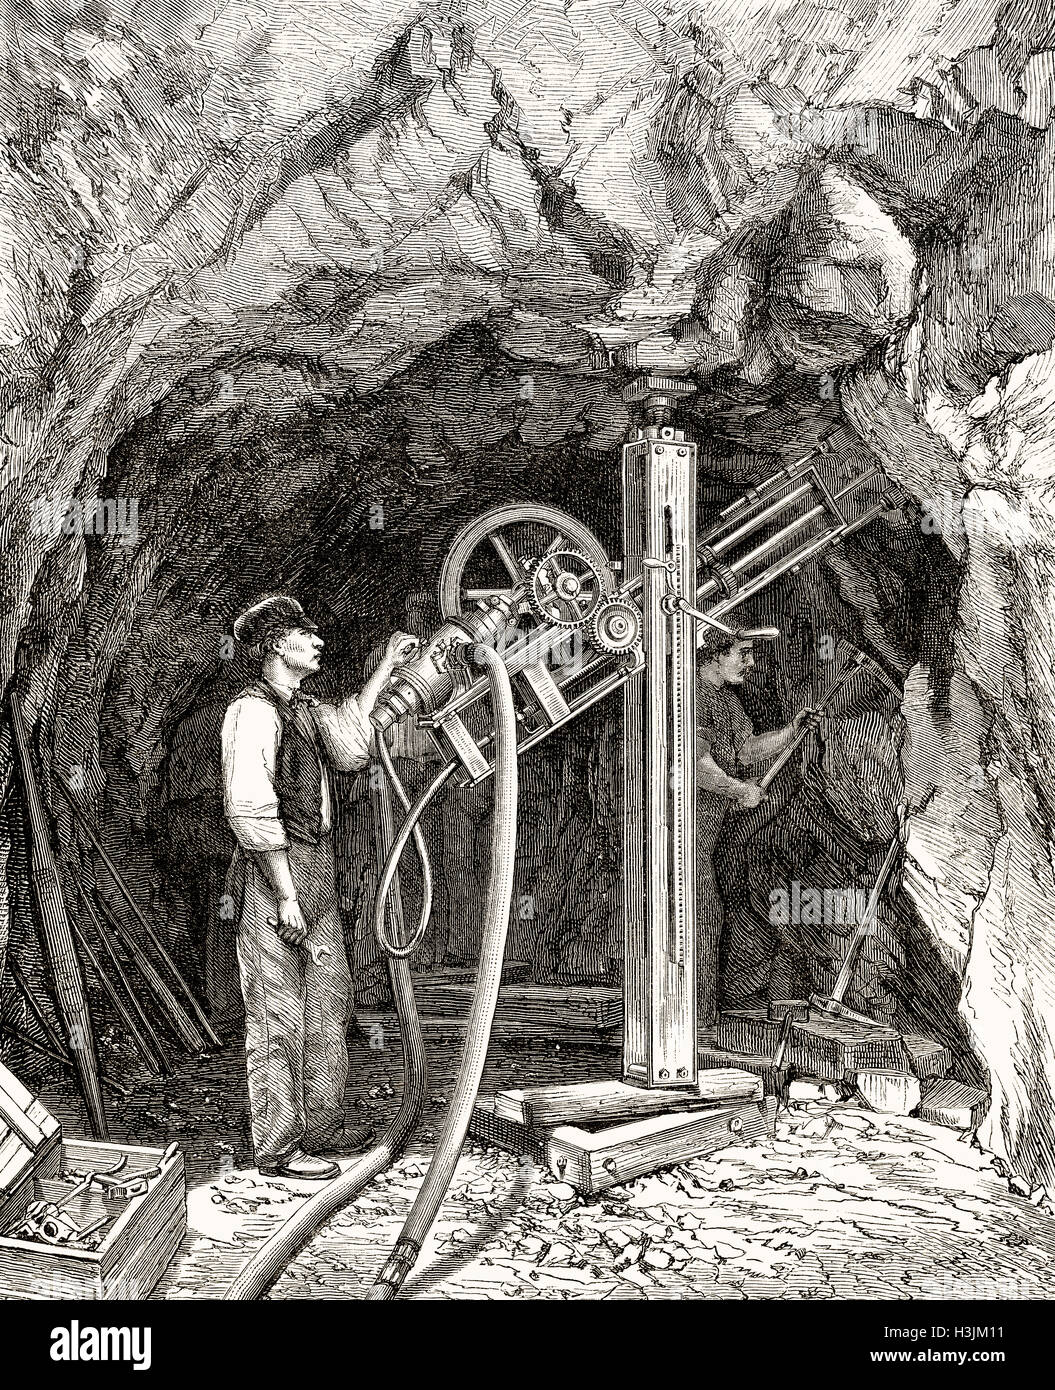 Motor Hammer Drill of the Swiss engineer Leschot, 1800-1884, Perret motor, Fréjus Rail Tunnel or Mont Cenis Tunnel, 19th century Stock Photo